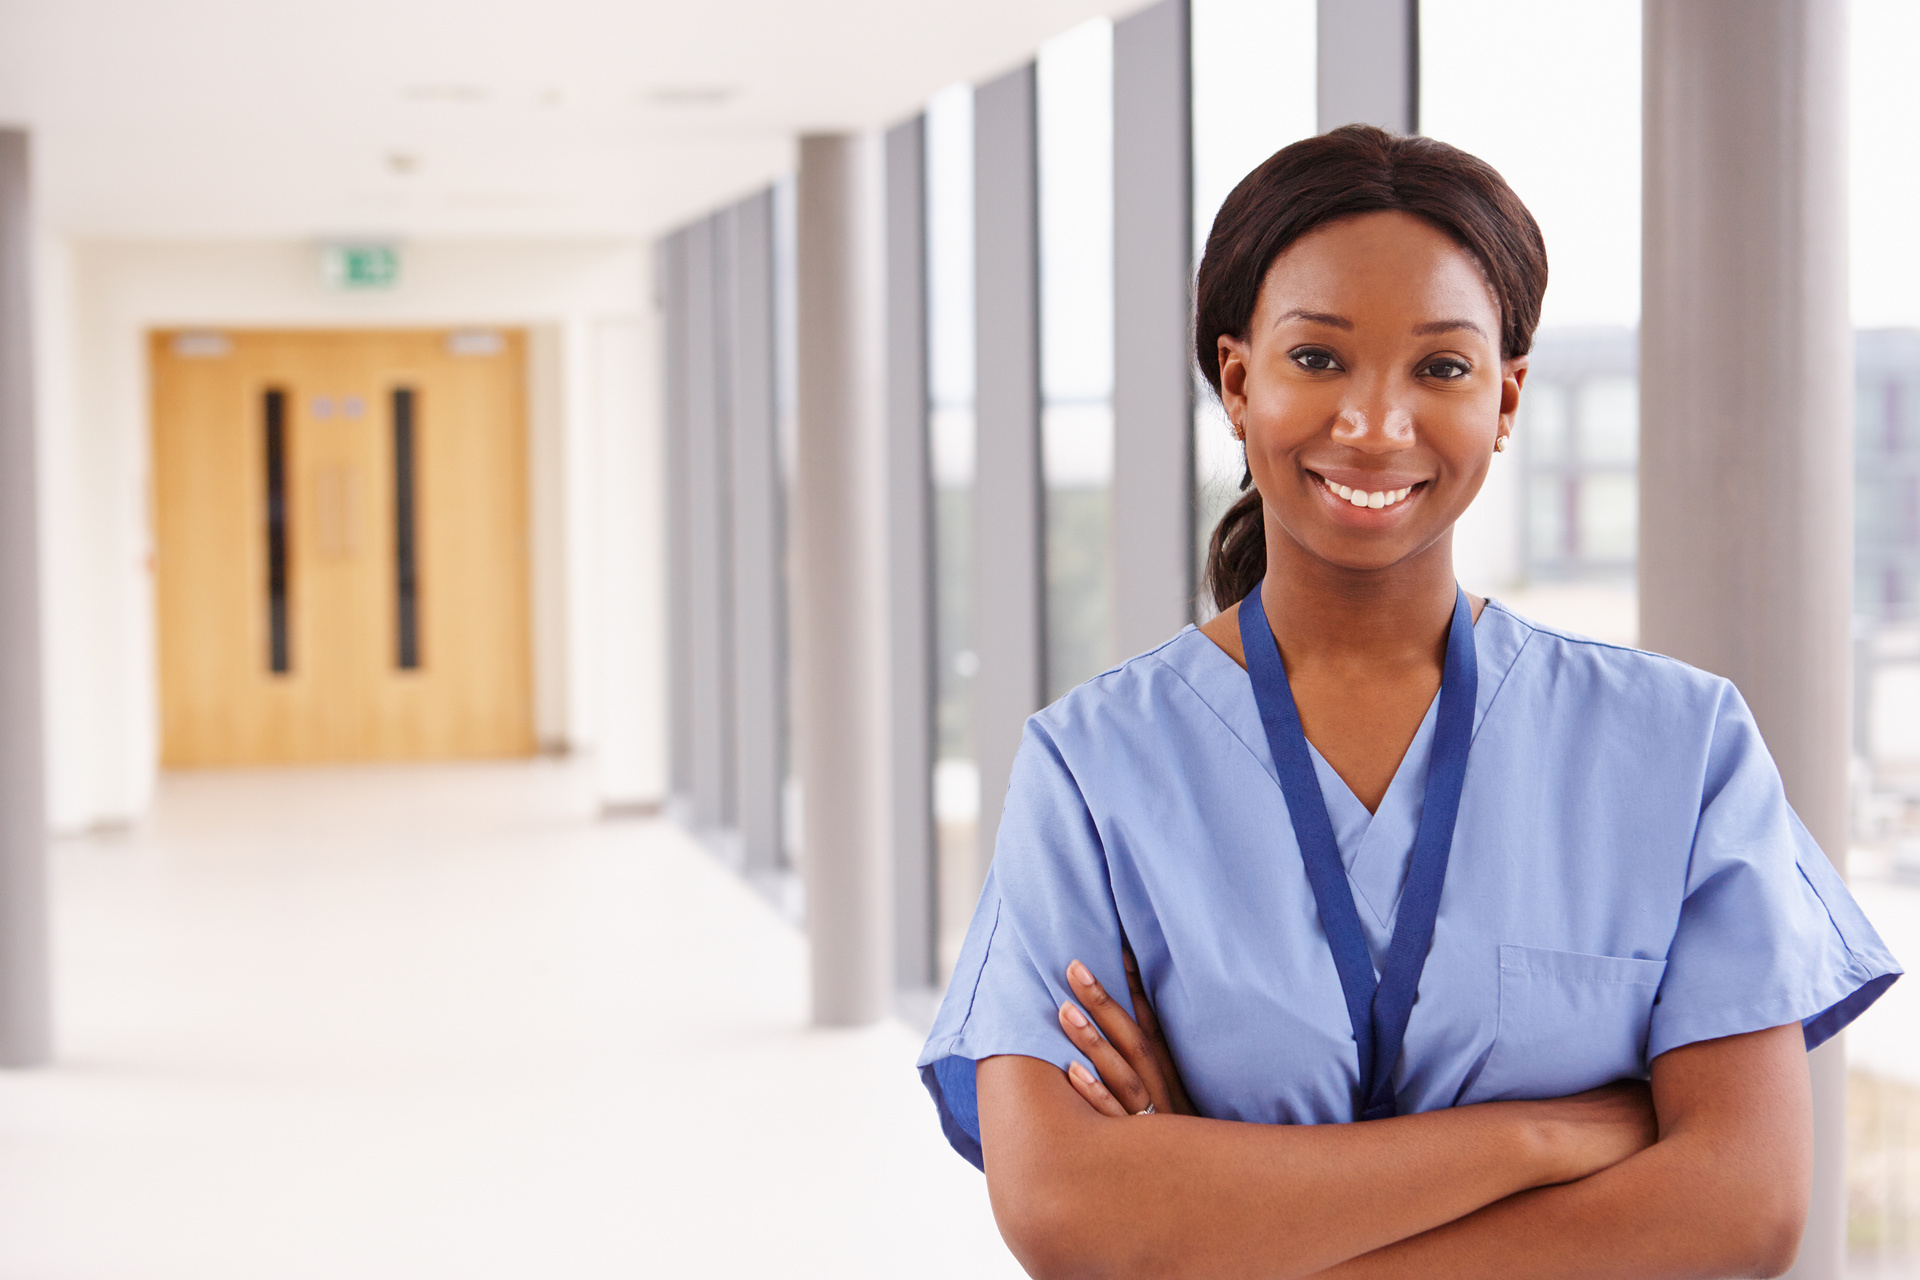 Solved What are some of the most important qualities a nurse